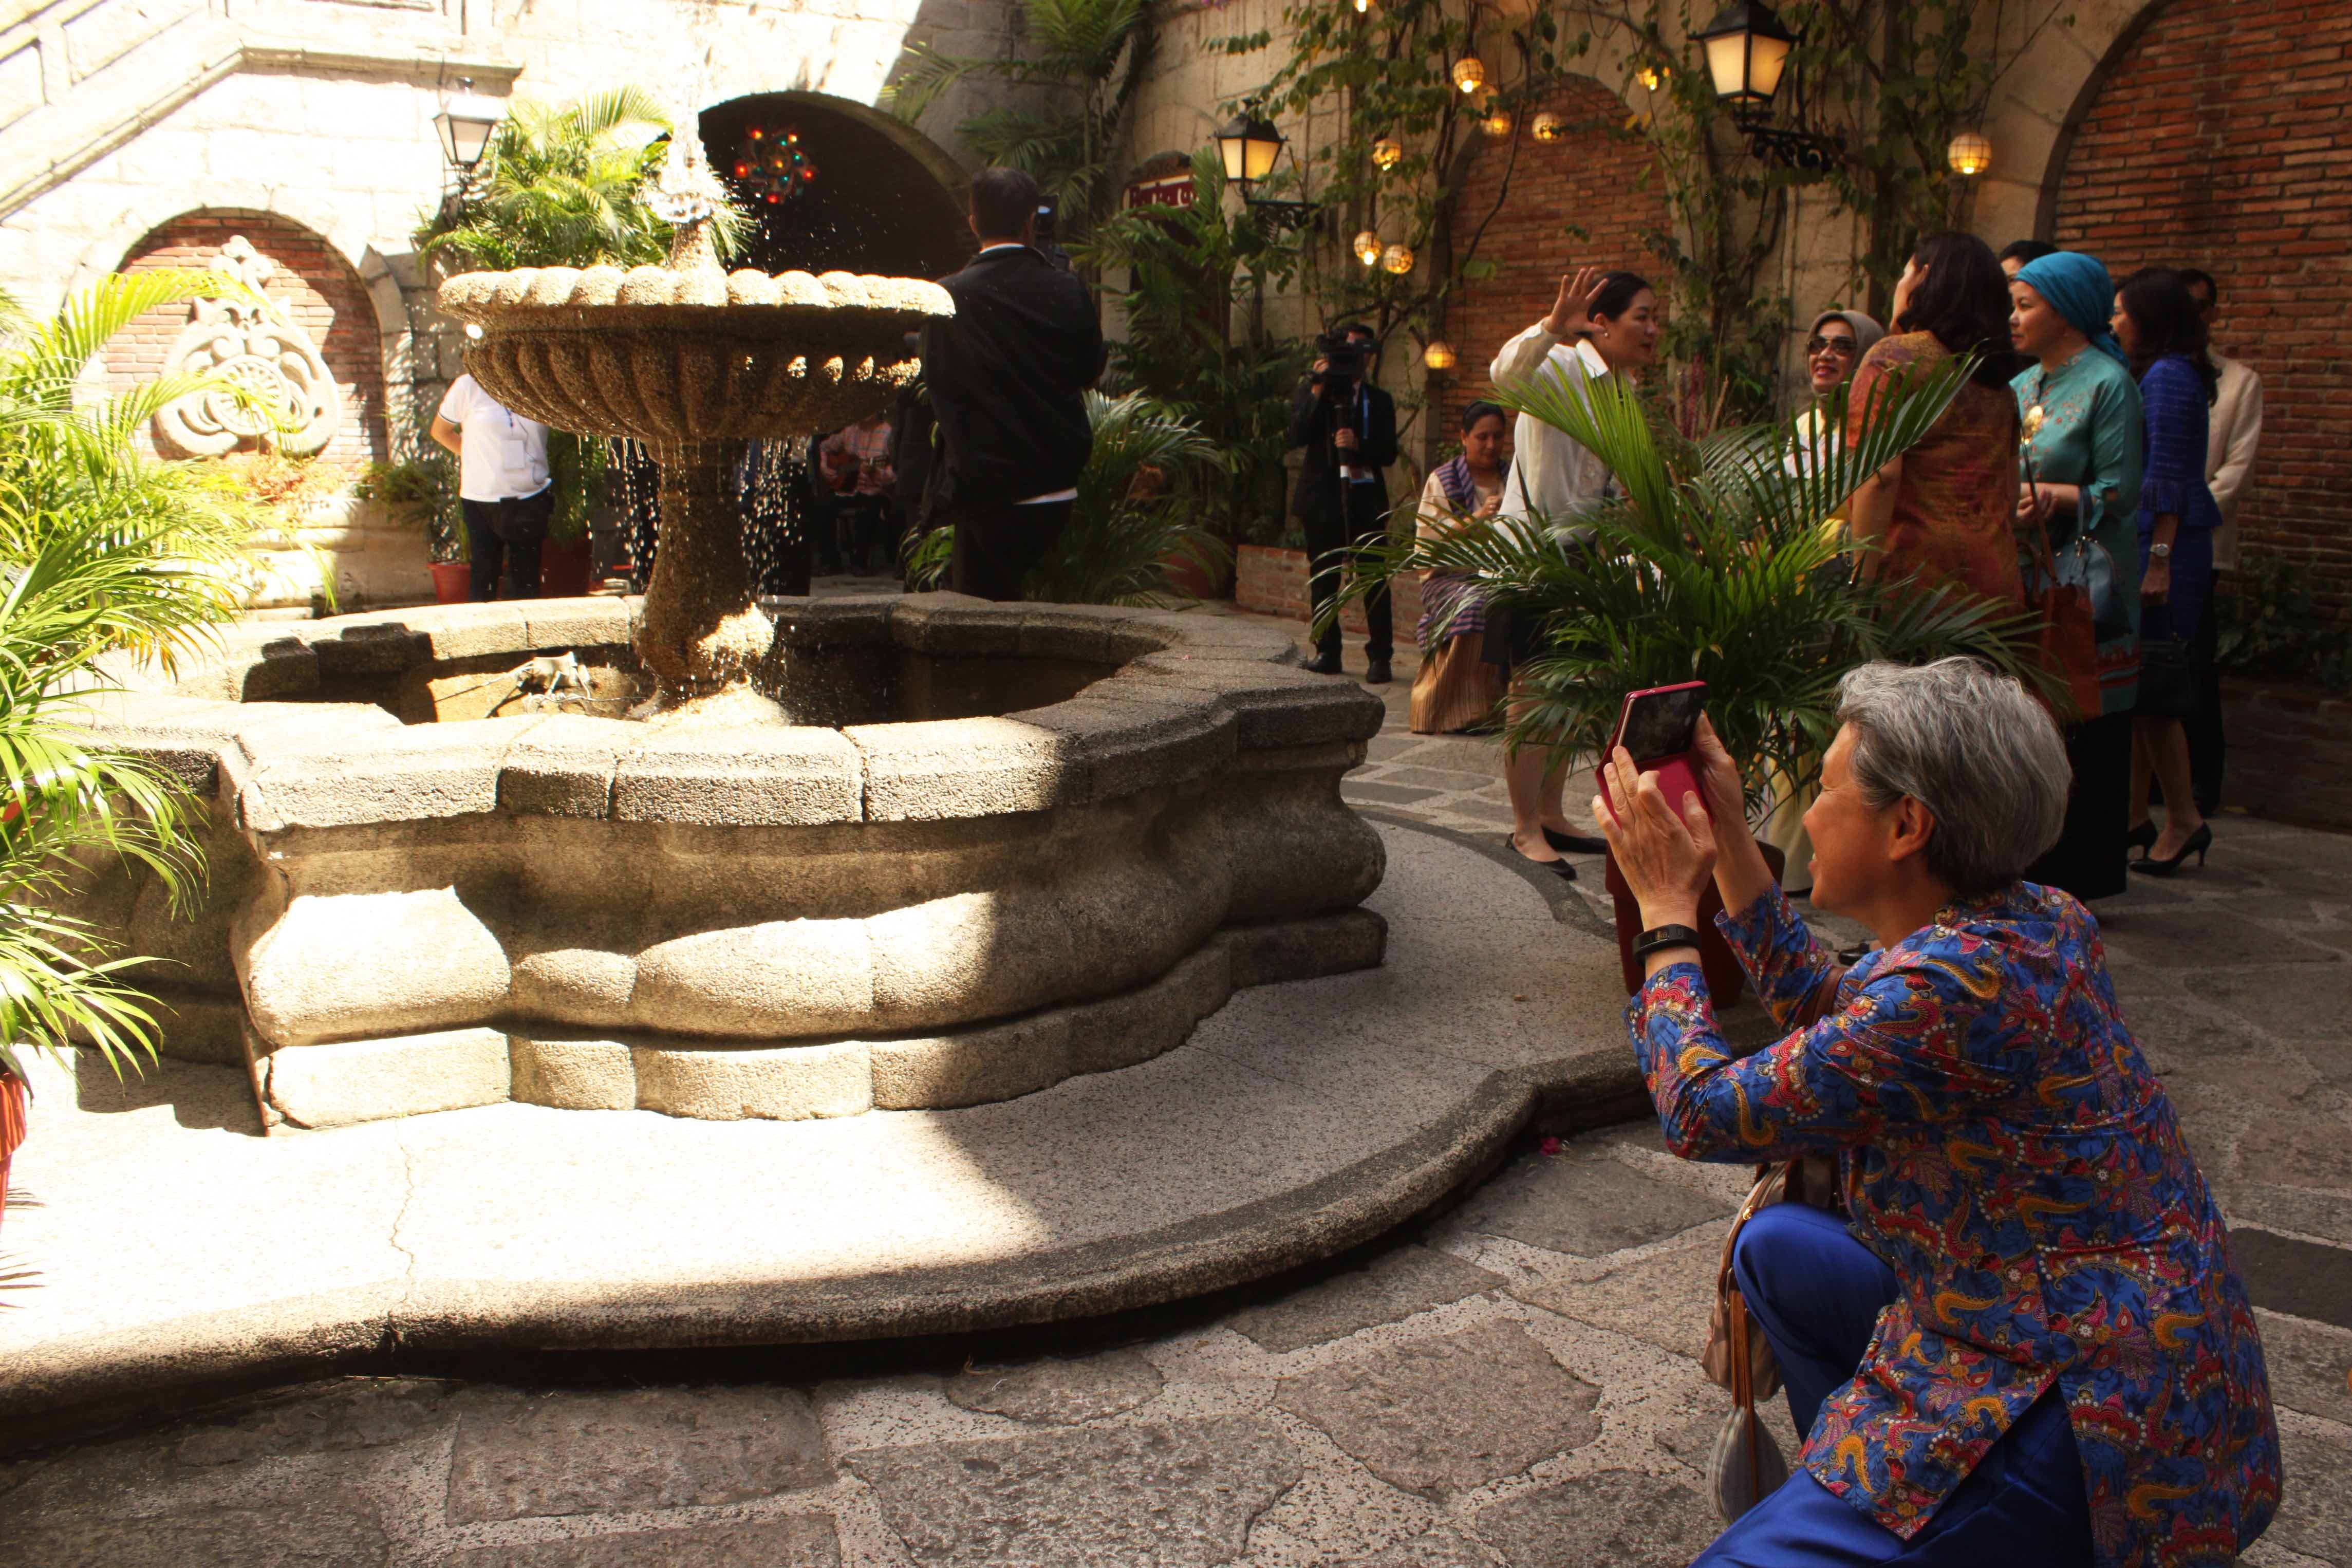 SIGHTSEEING. Ho Ching, wife of Singapore Prime Minister Lee Hsien Loong, takes a photo while touring around Intramuros.